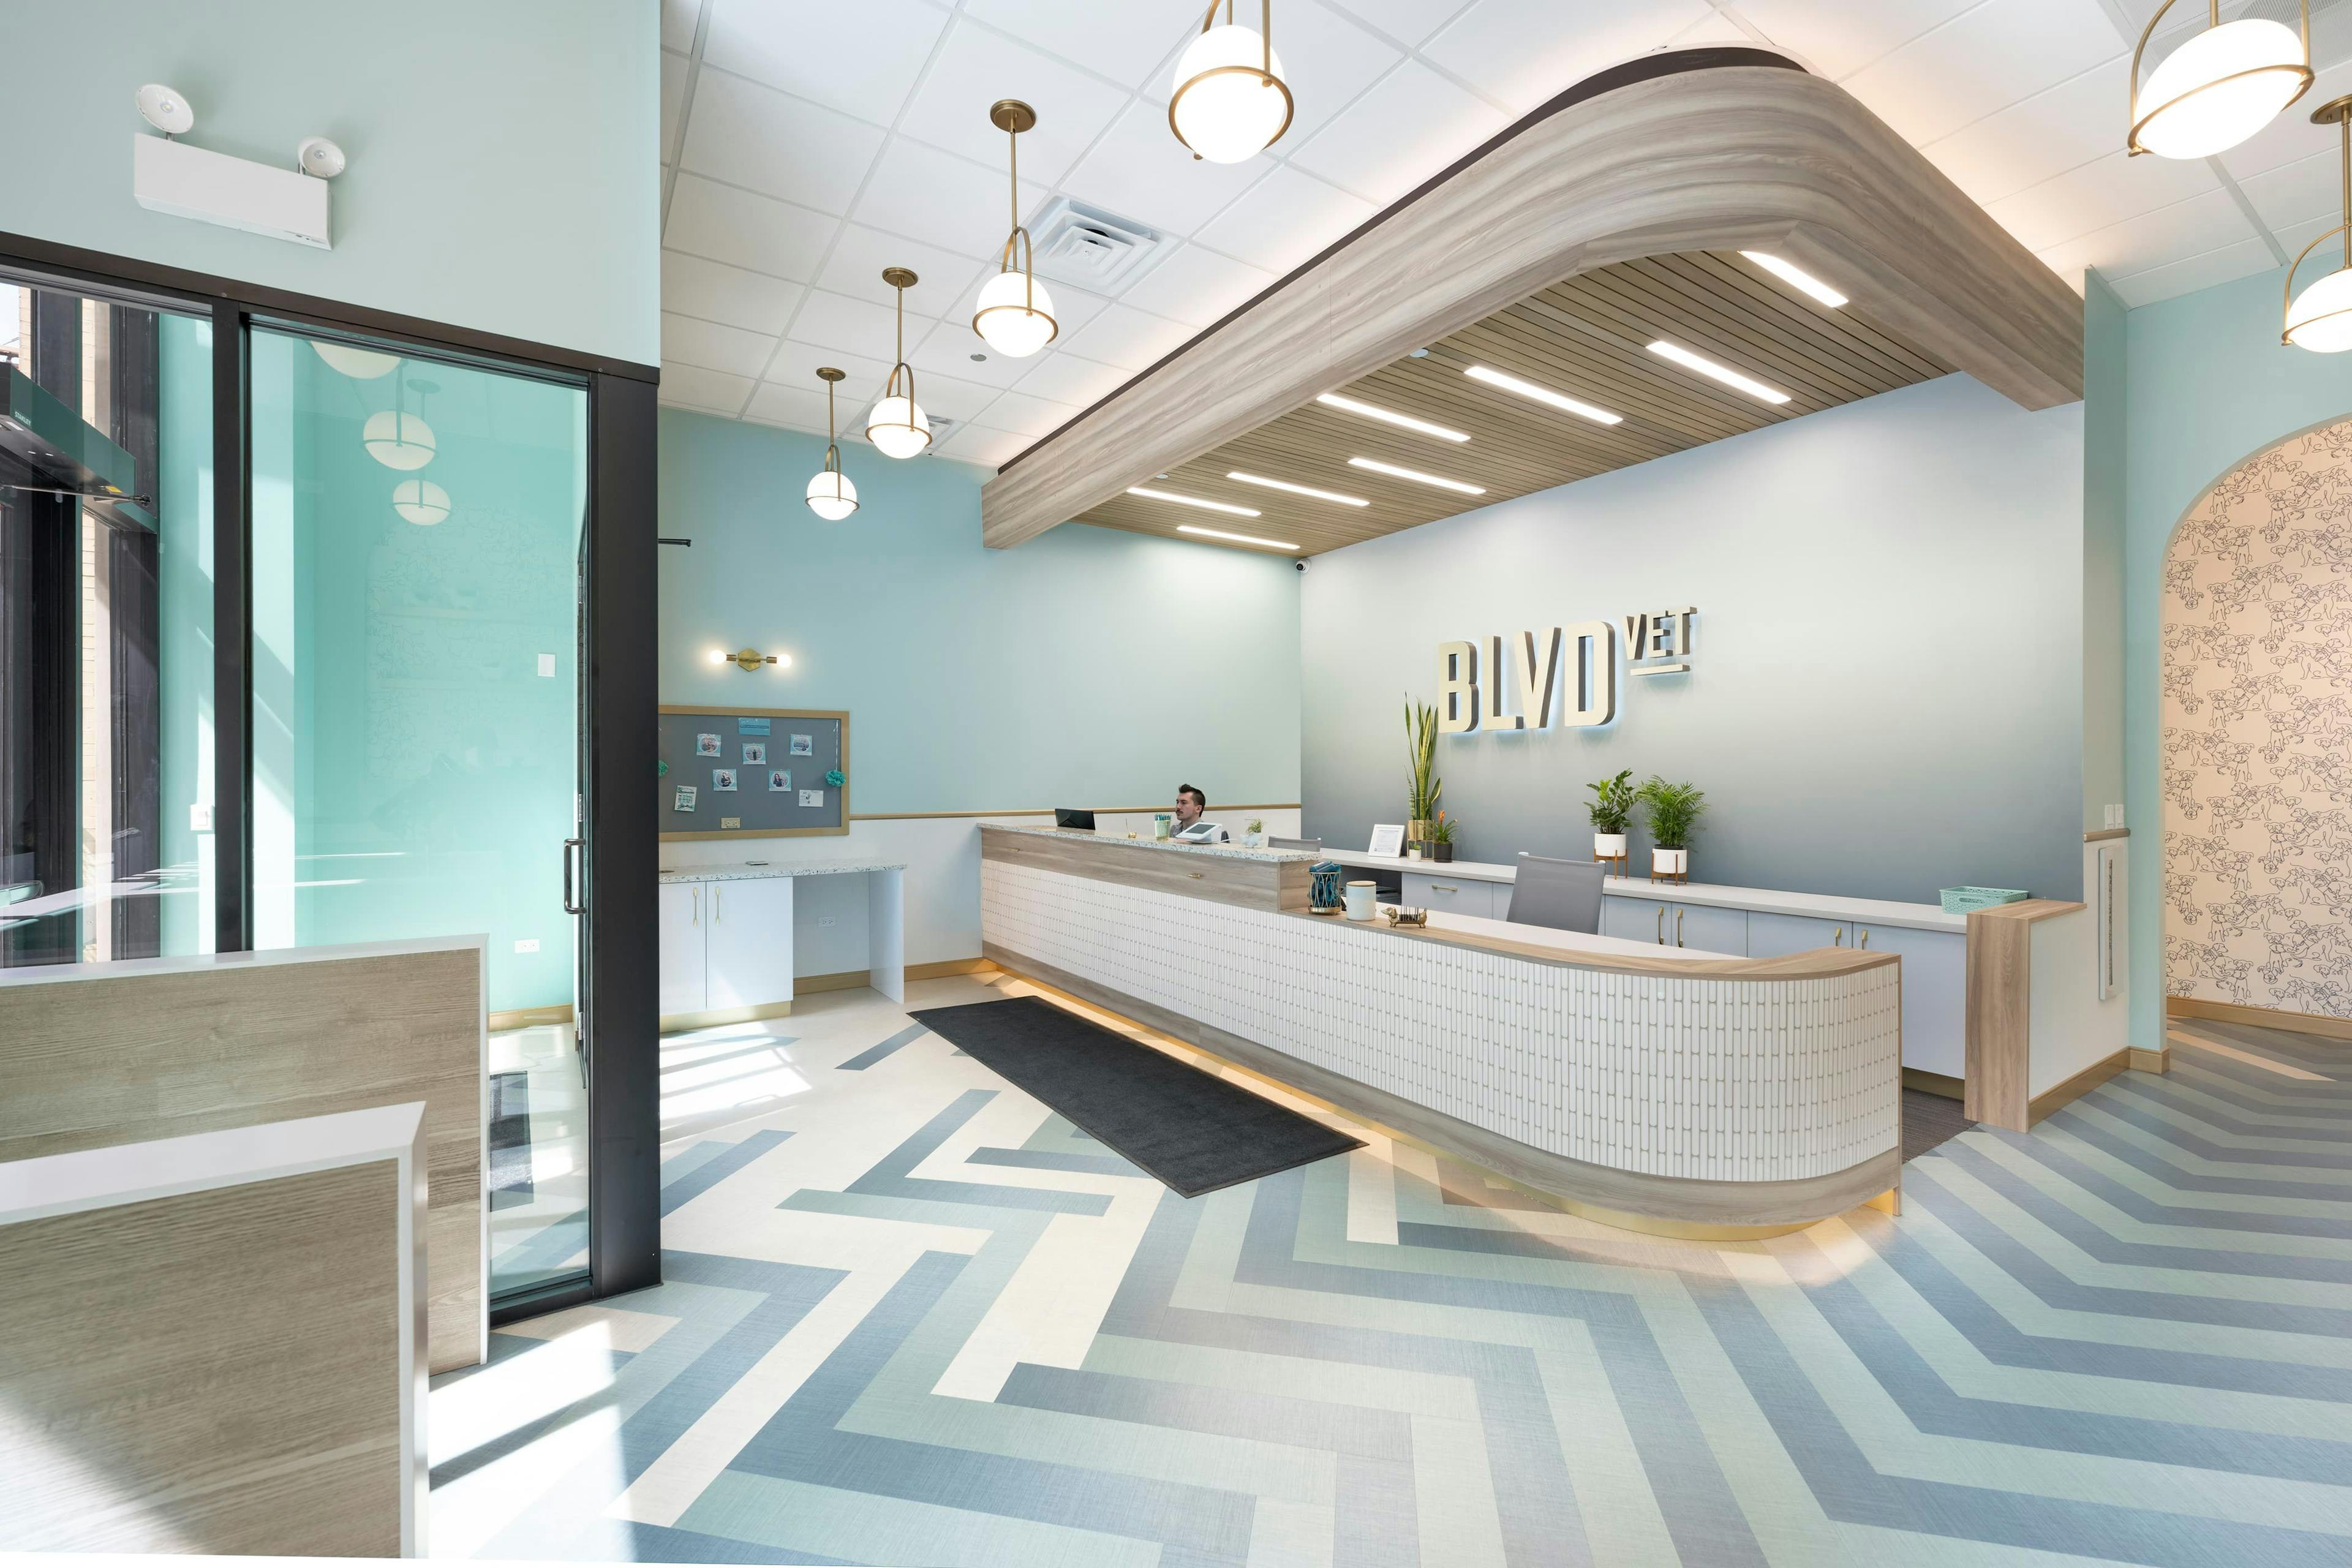 Clinic design is an ode to its Chicago neighborhood